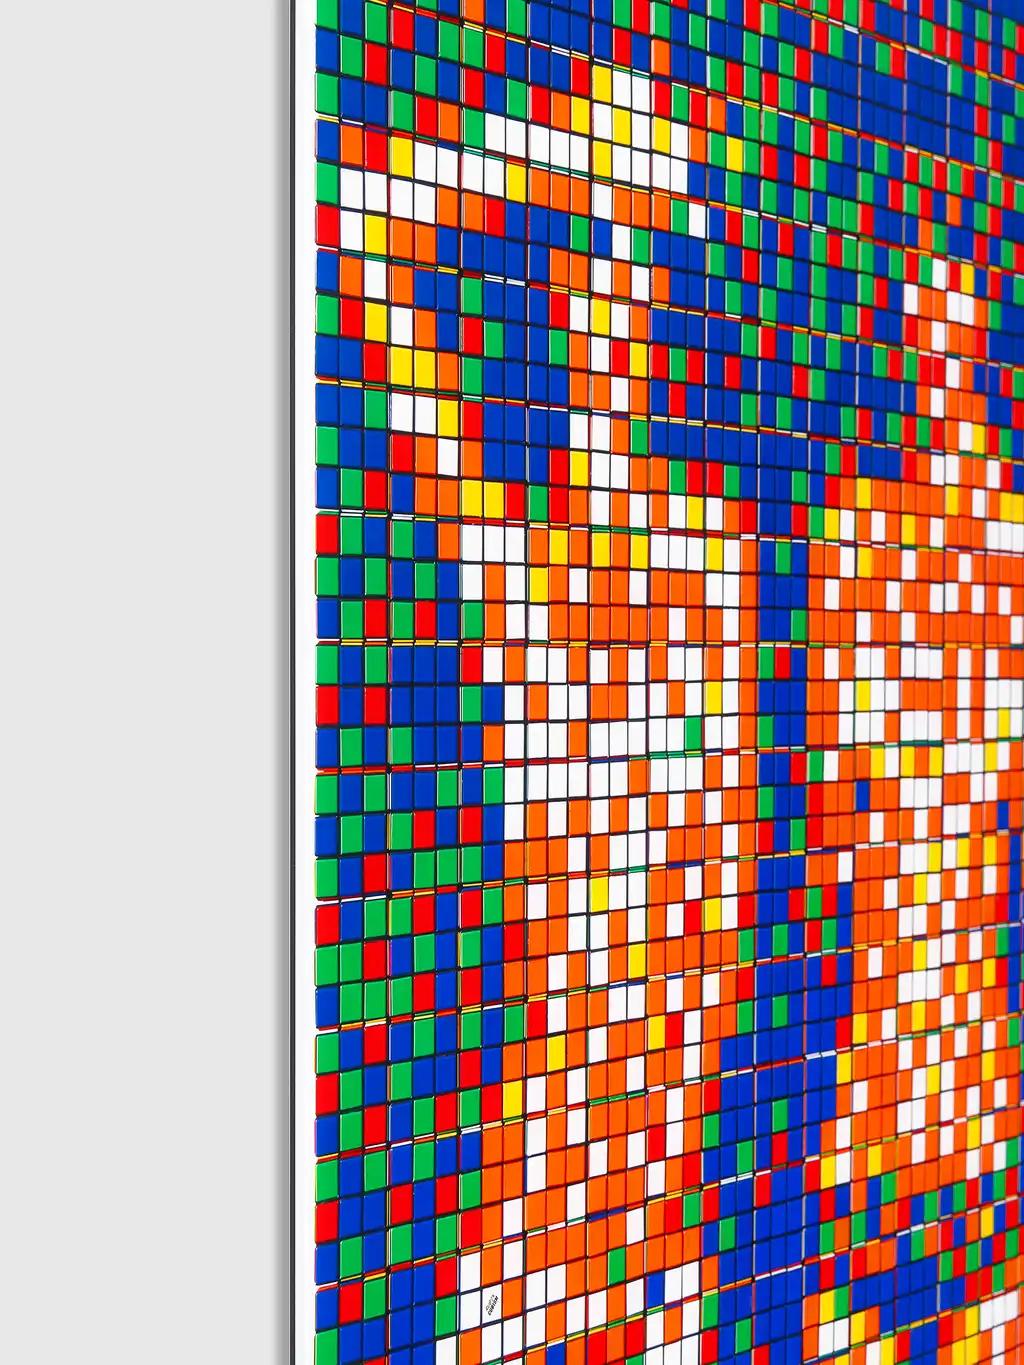 INVADER - RUBIK COUNTRY LIFE
Date of creation: 2023
Medium: Diasec-mounted Giclée on aluminium composite panel
Edition: 431
Size: 100 x 100 cm
Condition: Brand new, in mint conditions and never framed
This is a Diasec laminated giclée on aluminium